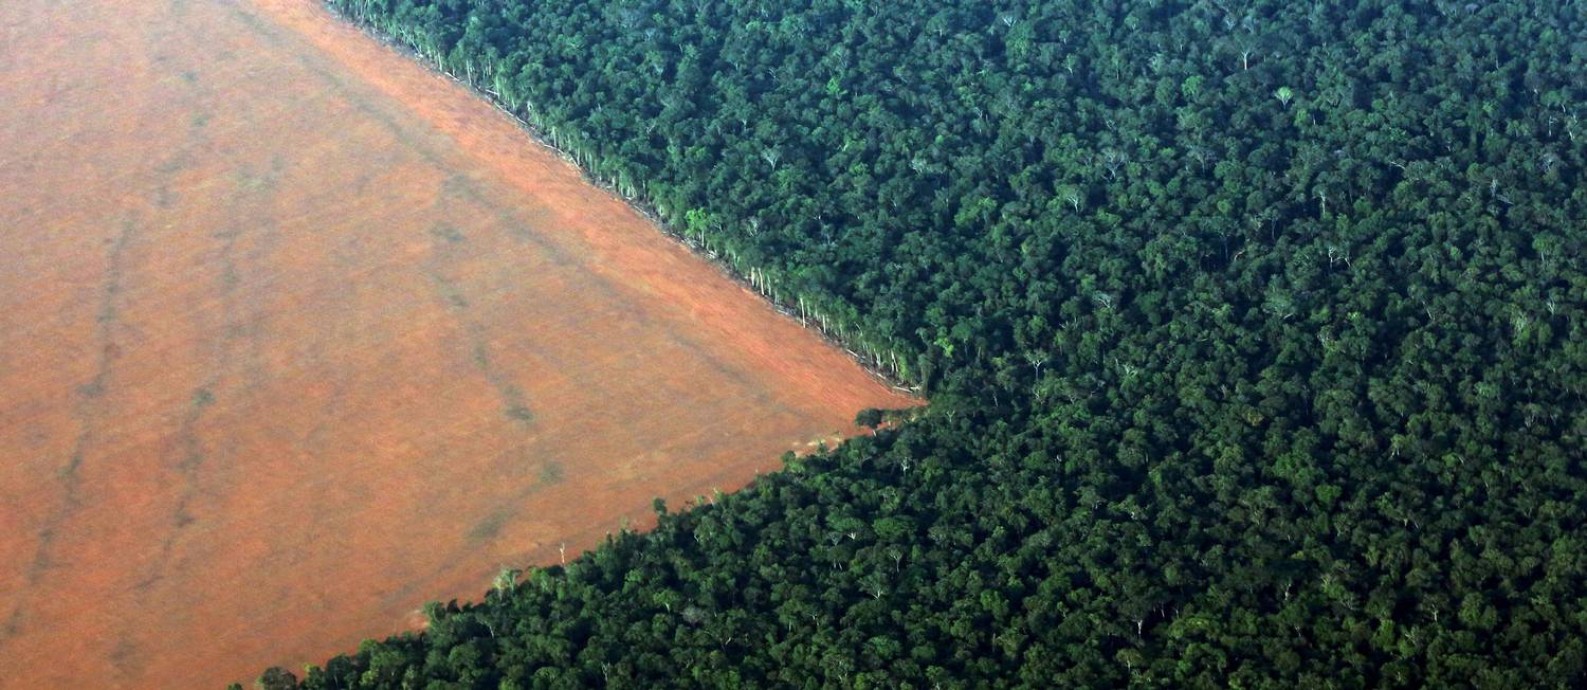 REFILE - REMOVING RESTRICTIONS FILE PHOTO: The Amazon rain forest (R), bordered by deforested land prepared for the planting of soybeans, is pictured in this aerial photo taken over Mato Grosso state in western Brazil, October 4, 2015. Picture taken October 4, 2015. desmatamento amazônia REUTERS/Paulo Whitaker/File Photo Foto: PAULO WHITAKER / Agência O Globo